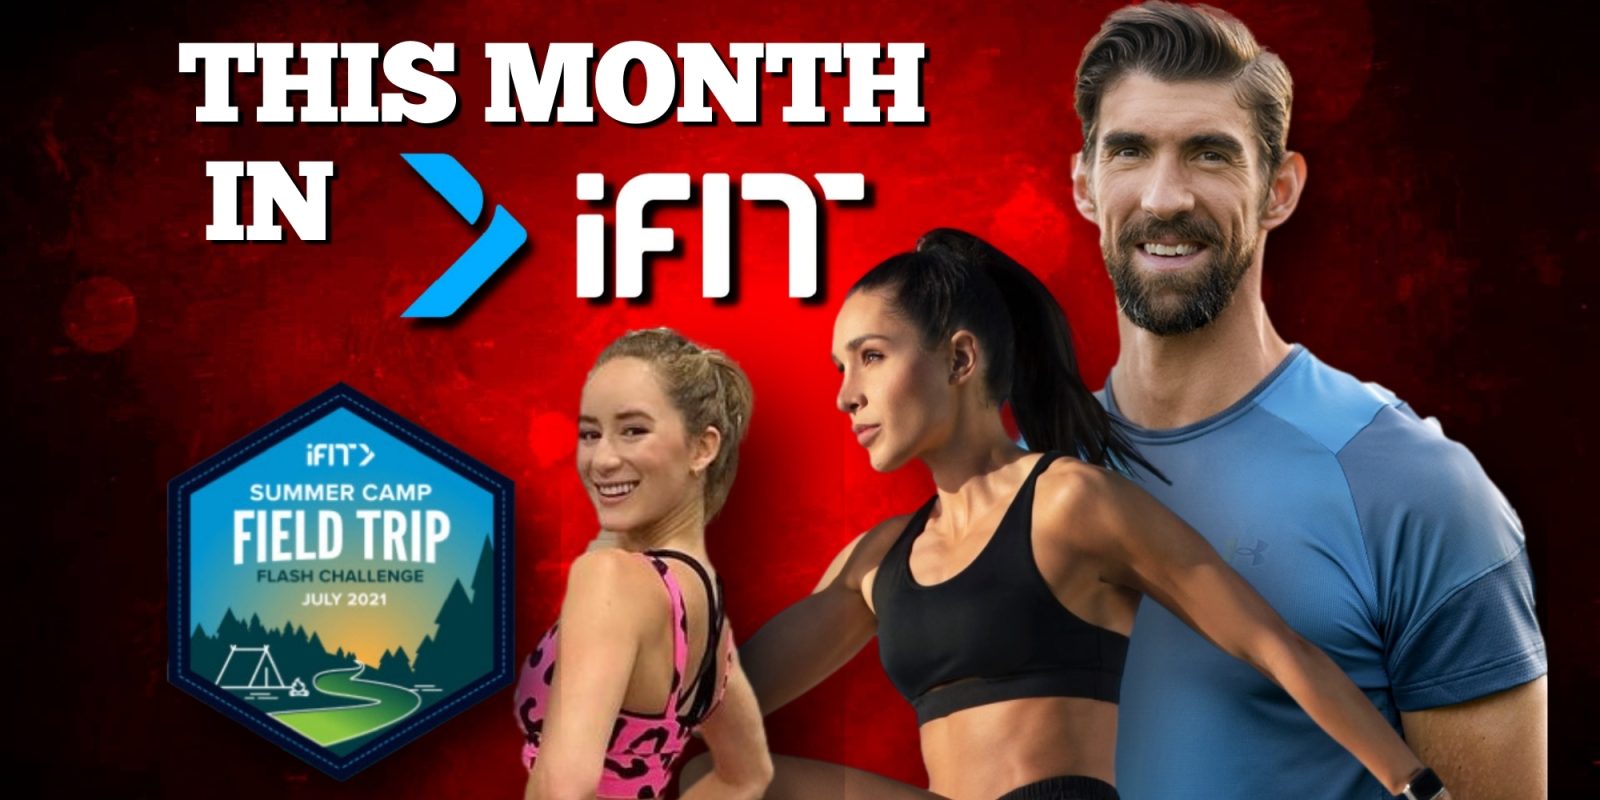 This Month in iFIT Michael Phelps, Kayla Itsines, and Summer Camp